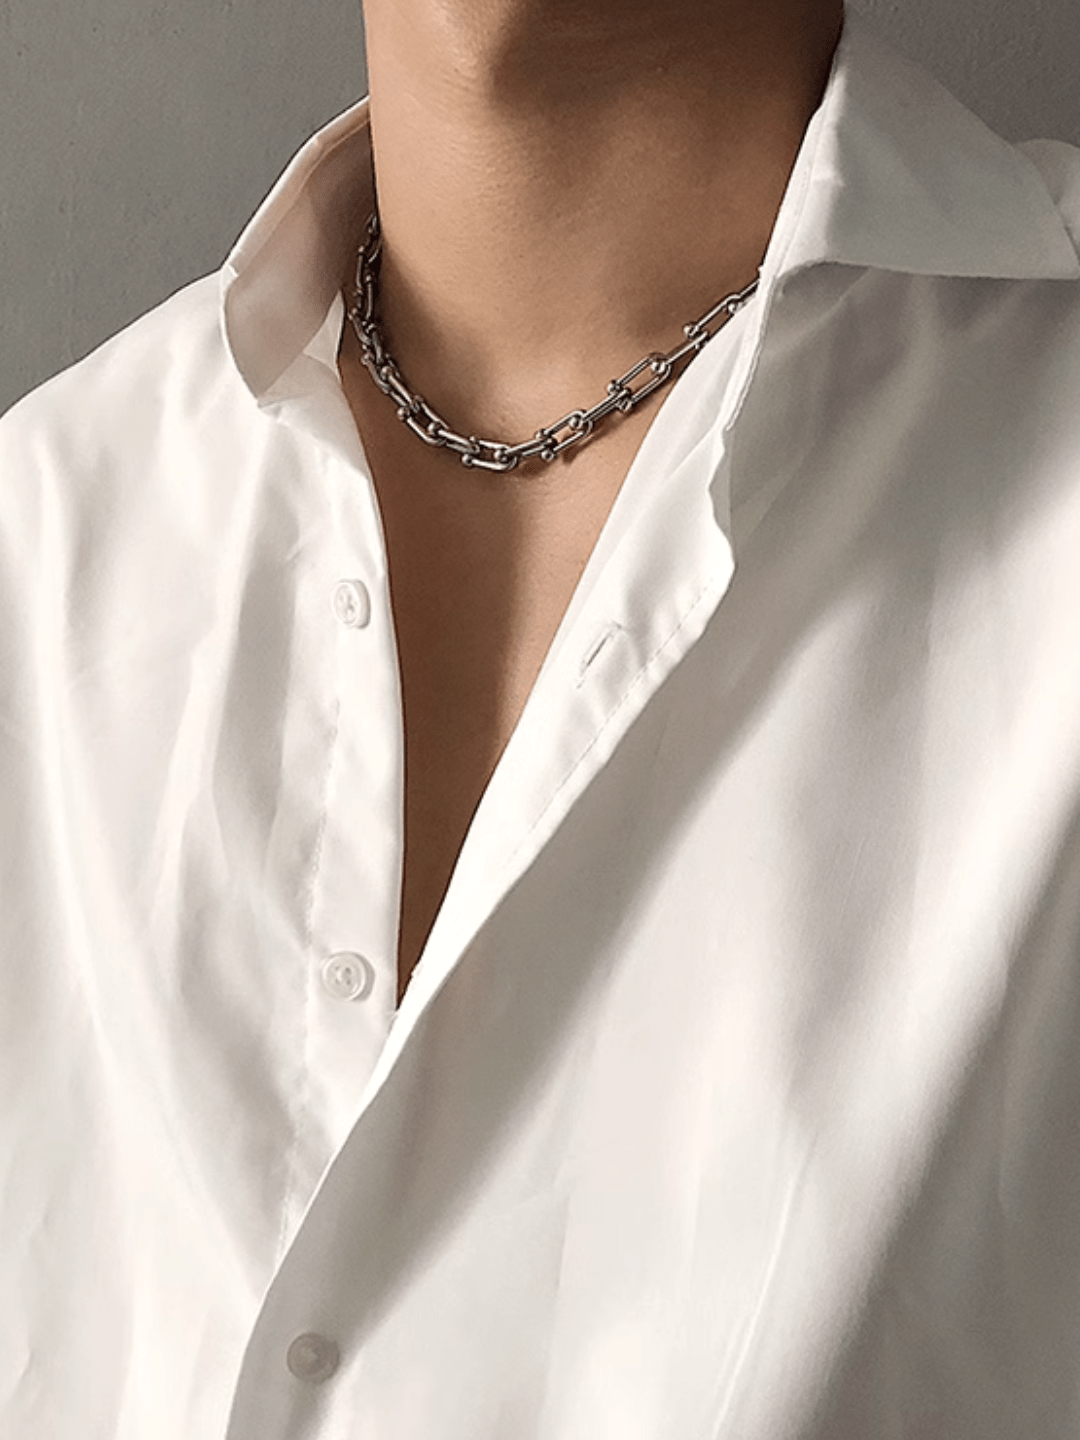 Korean style chain necklace na641